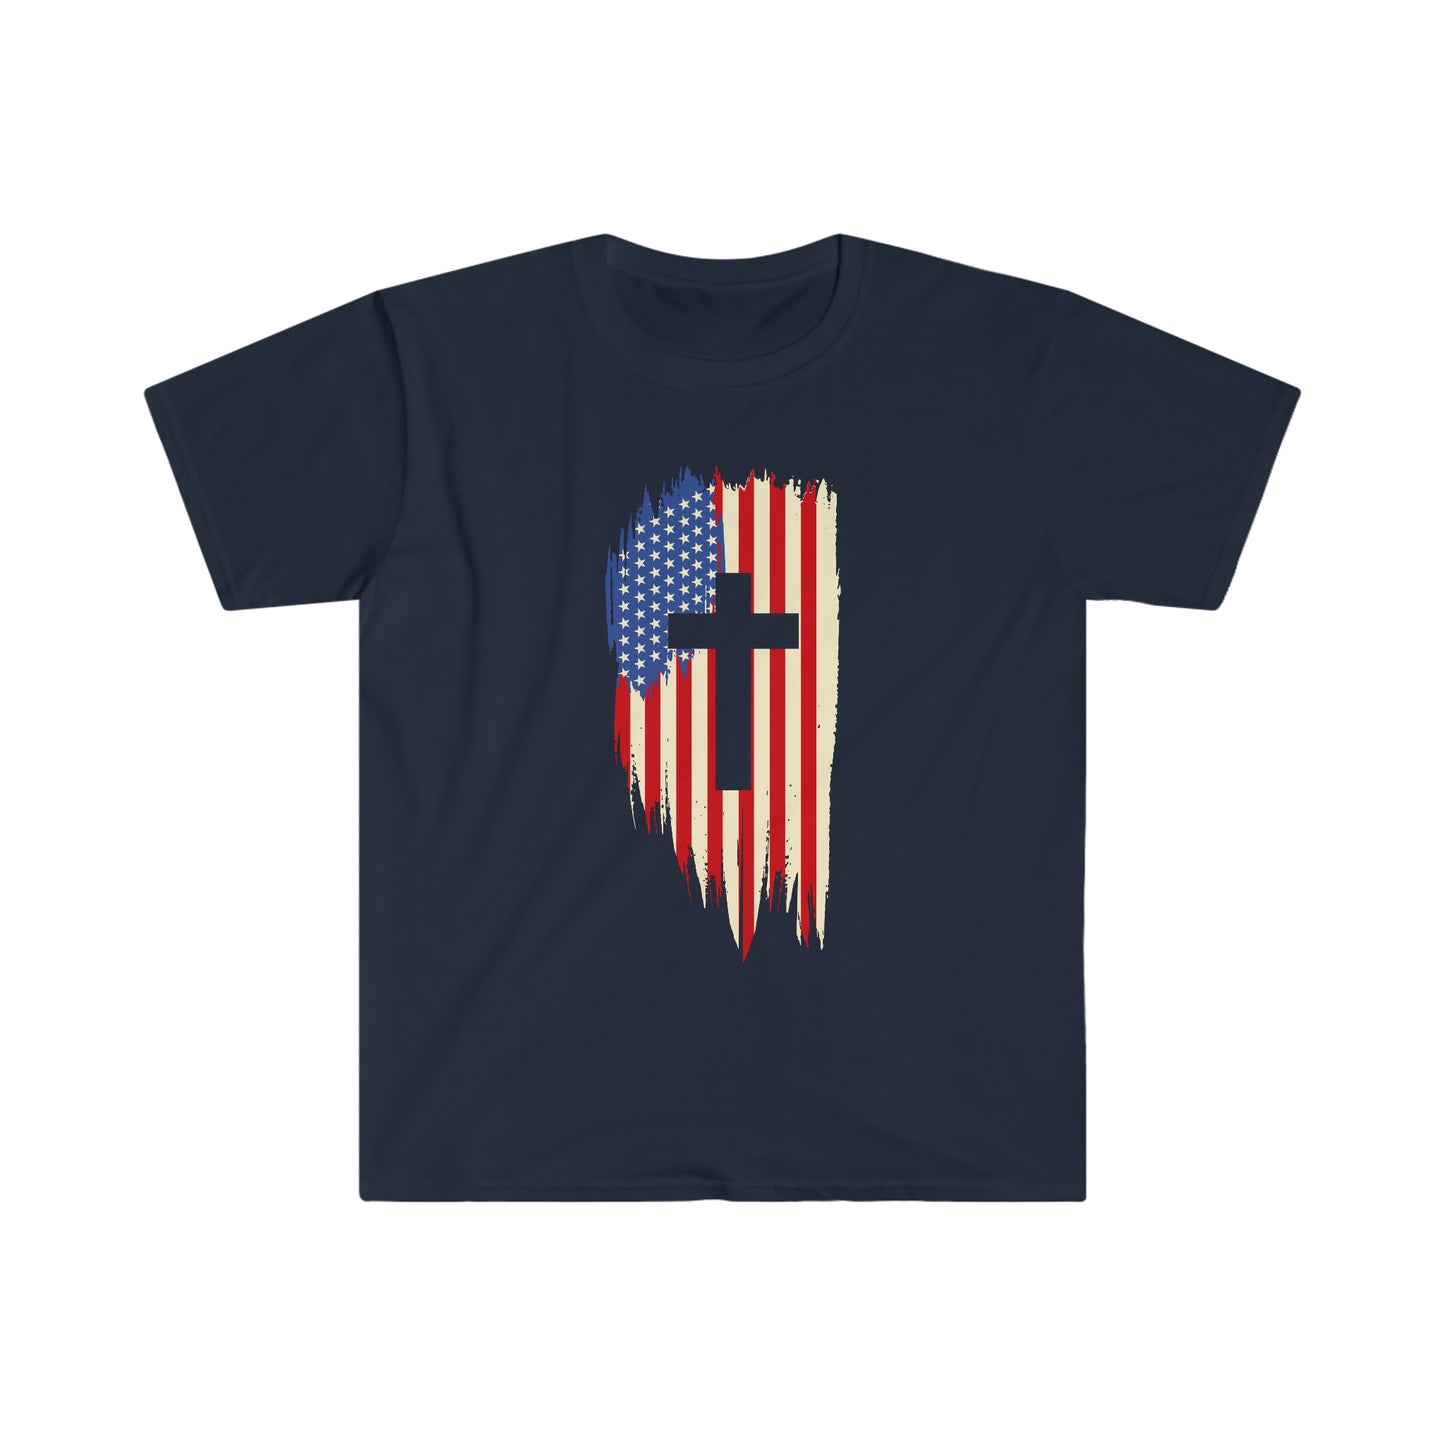 Unisex Softstyle T-Shirt Patriot Collection flag cross on multiple dark